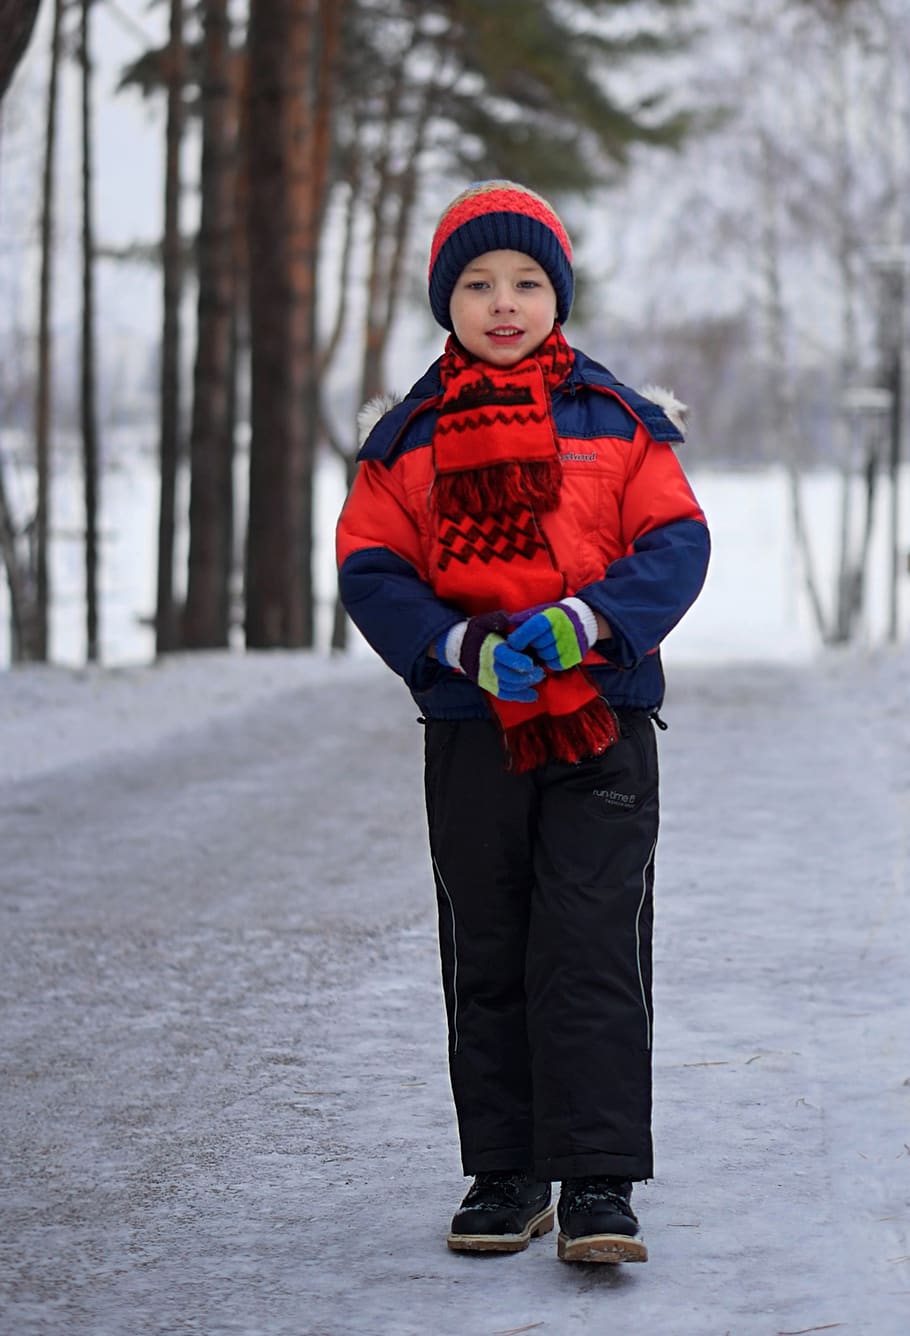 winter, snow, baby, coldly, outdoors, park, boy, red scarf